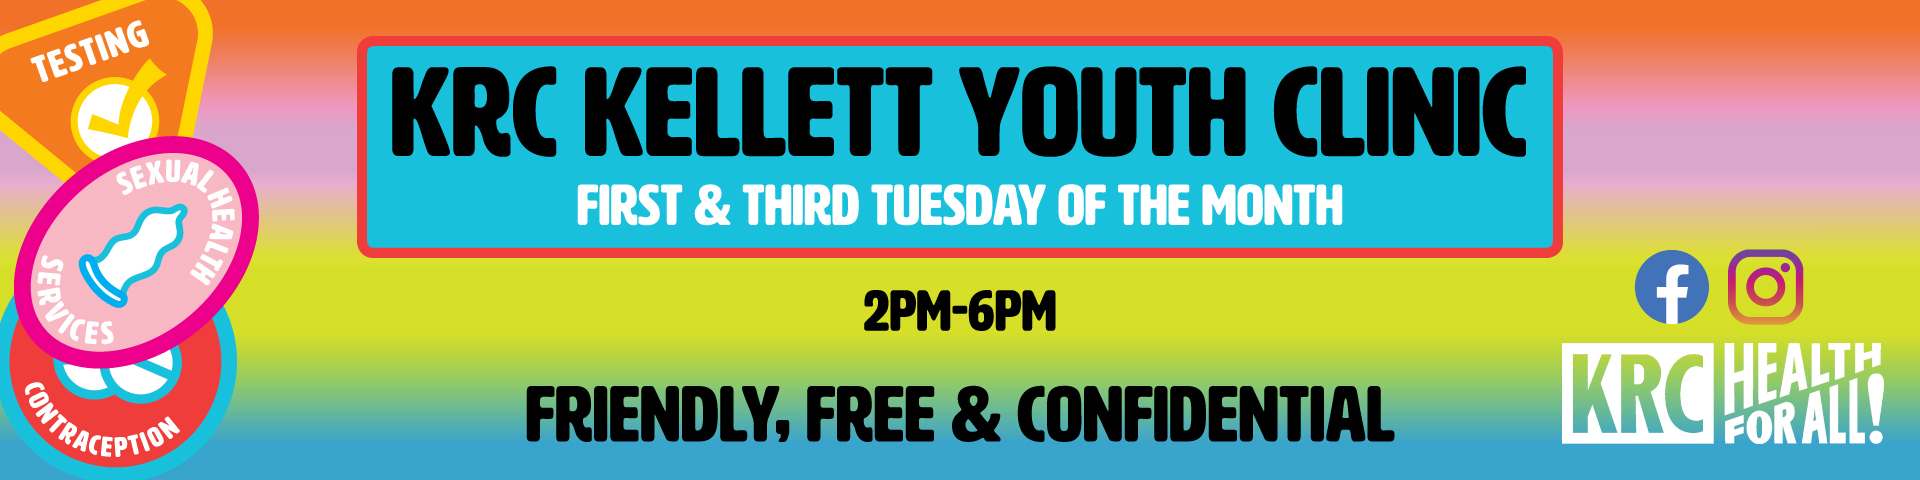 Kellett Street Youth Clinic A free non-judgemental & confidential health clinic for young people up to 25 years of age who are homeless, vulnerable or experiencing other types of social hardship